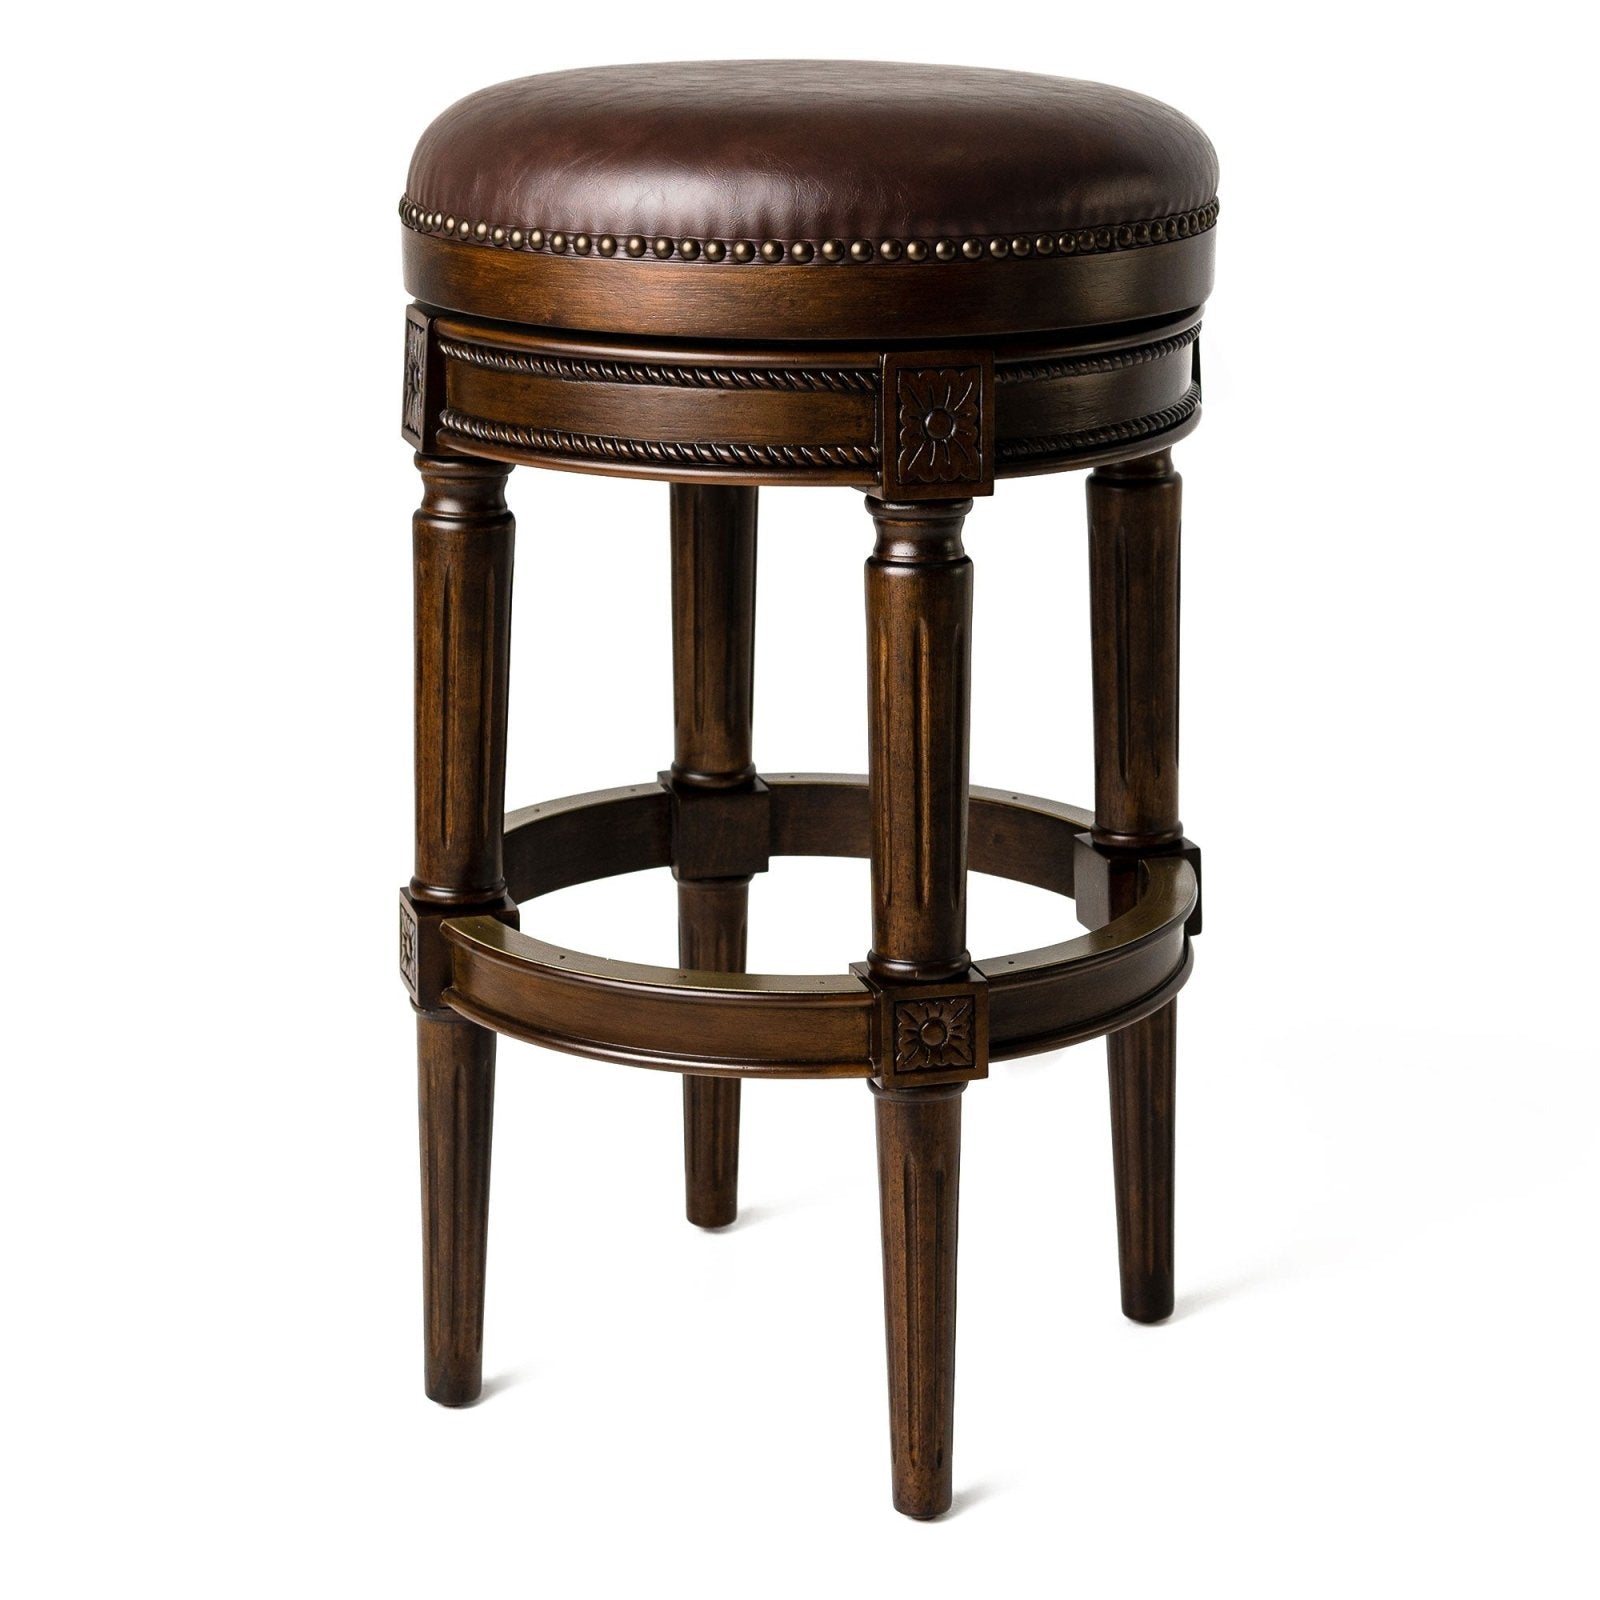 Pullman Backless Bar Stool in Dark Walnut Finish with Vintage Brown Vegan Leather in Stools by Maven Lane